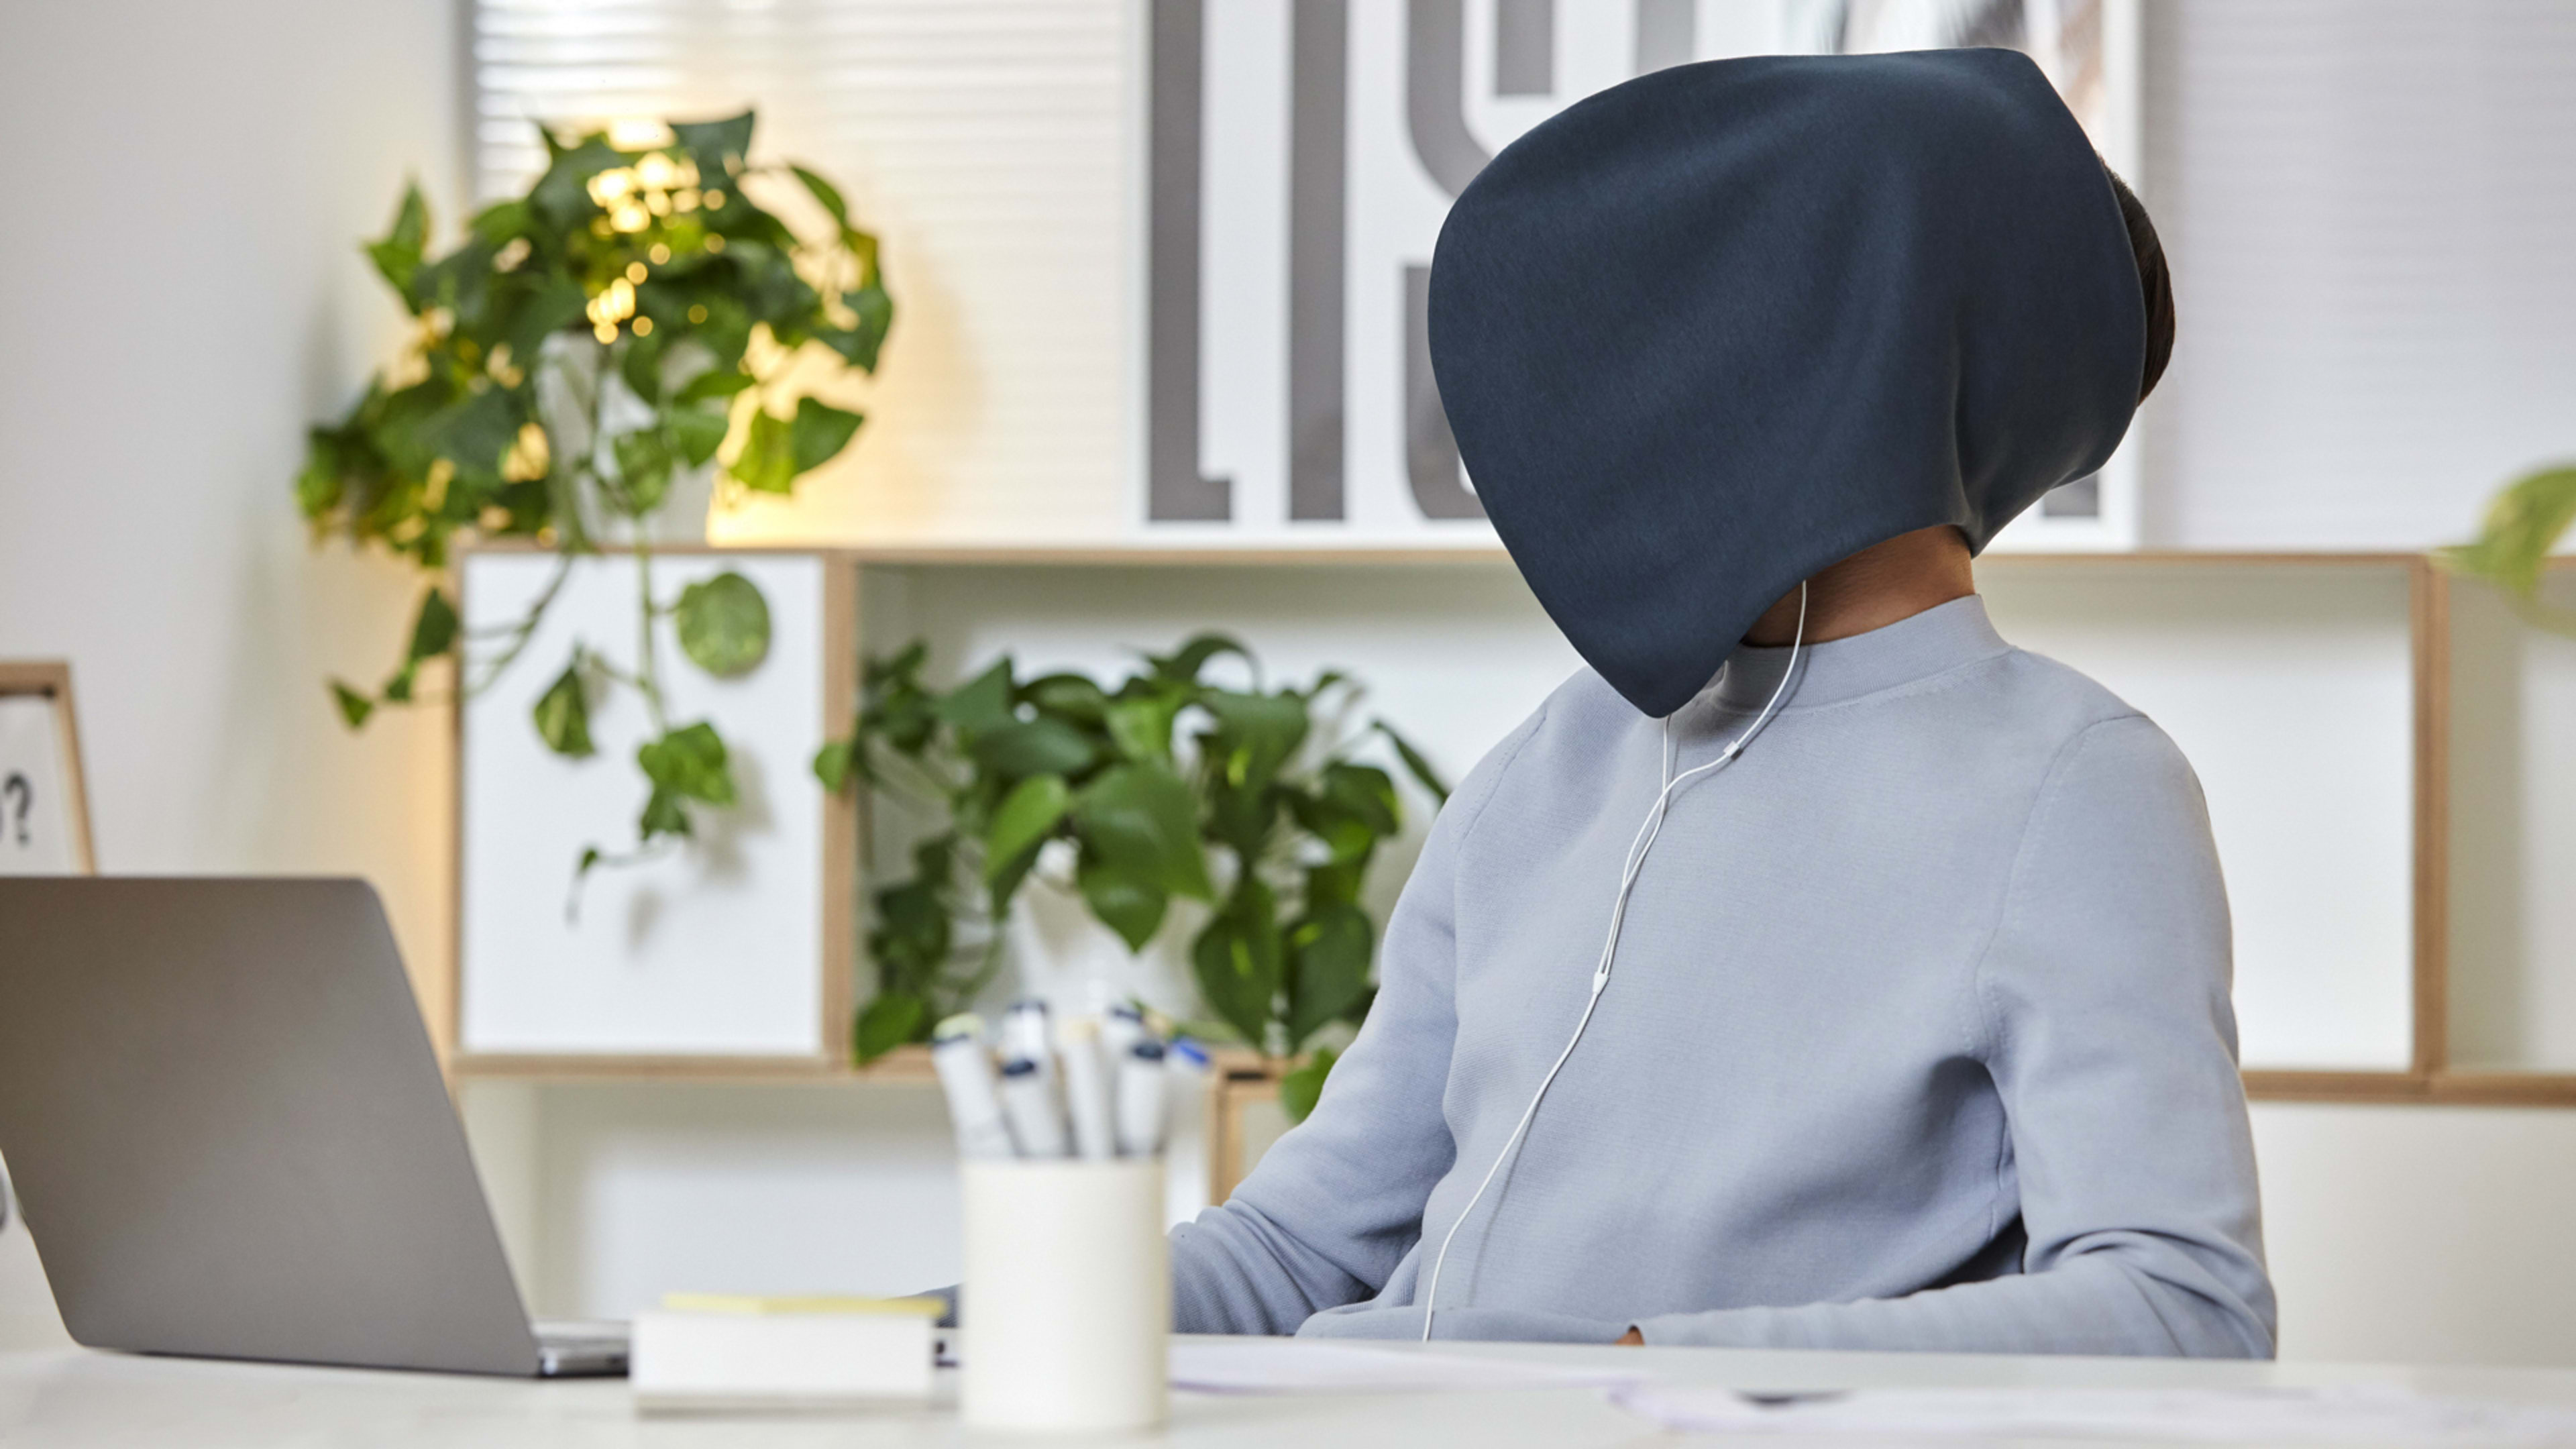 Ostrichpillow, the bizarre viral napping pod, now has a less dorky design